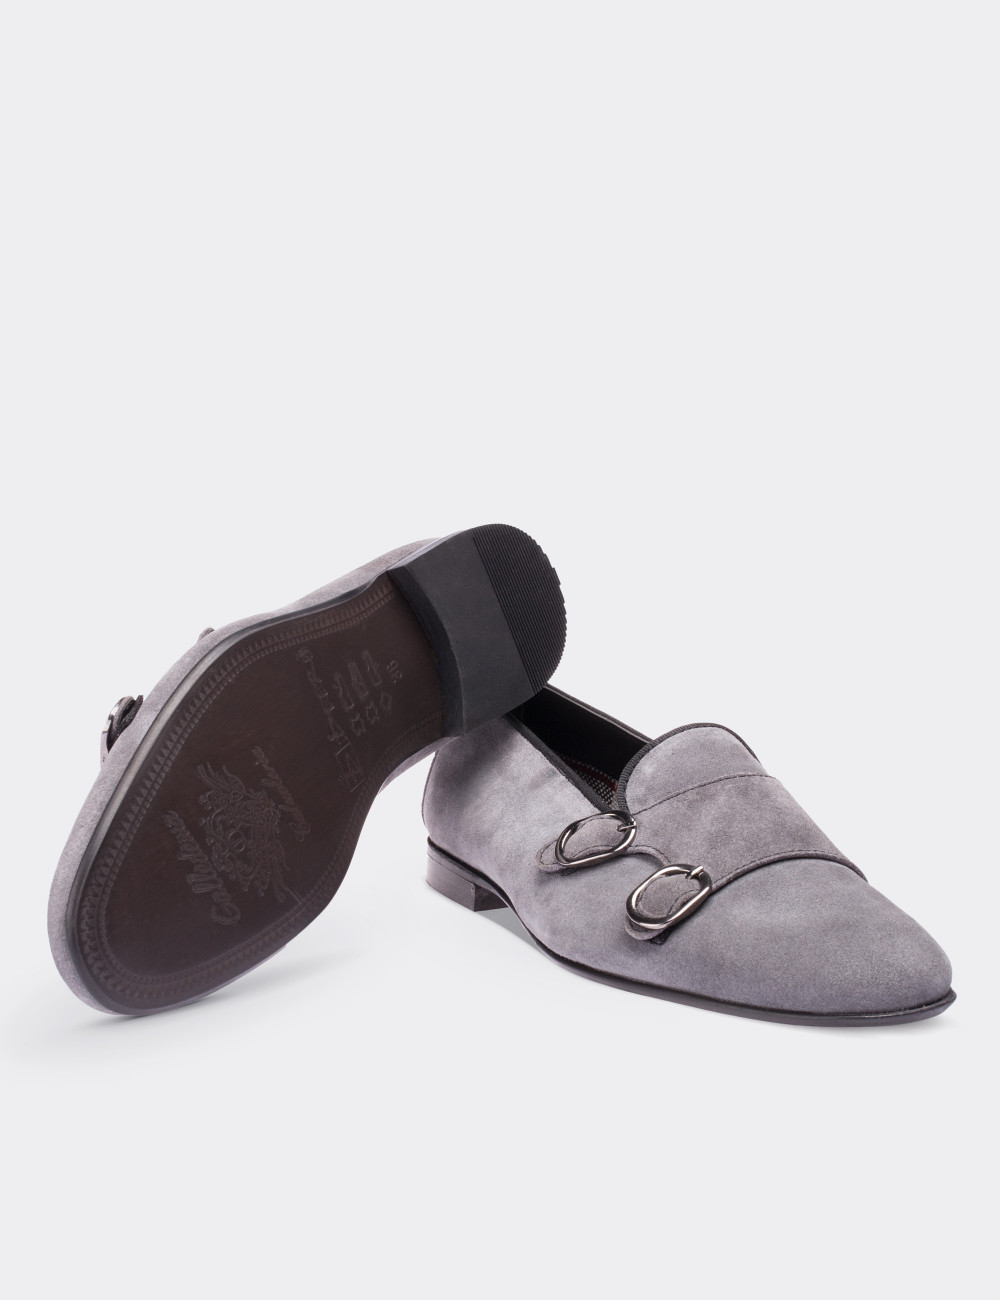 Gray Suede Leather Loafers - 01611ZGRIM01